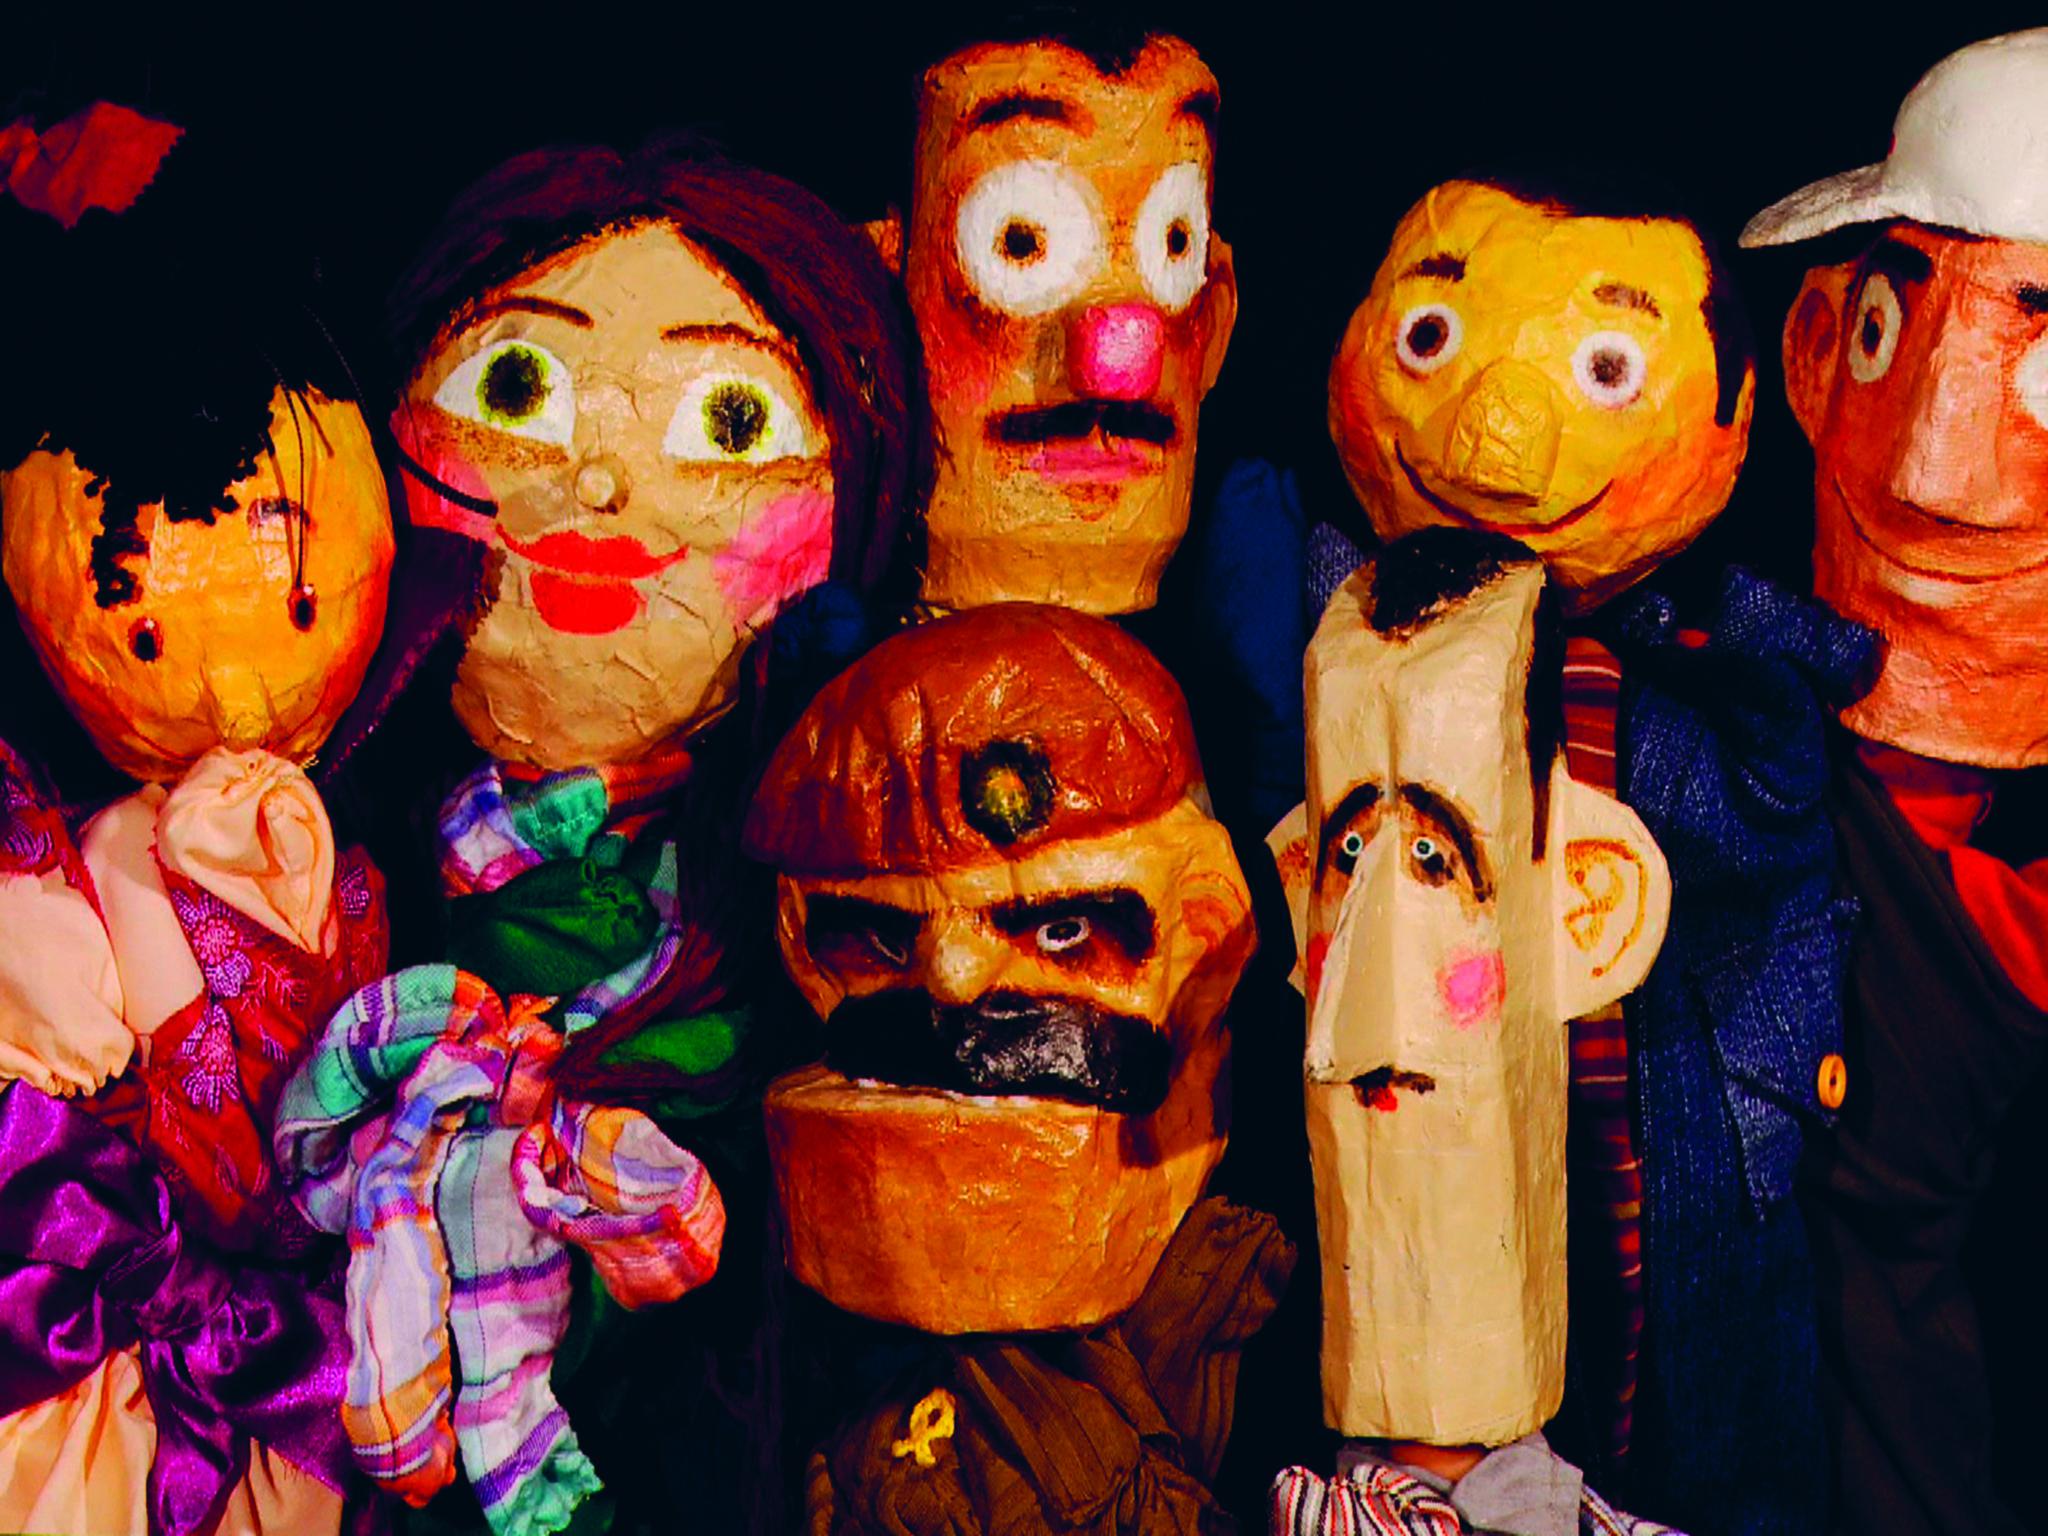 The assembled puppets of Top Goon and the chief villain 'Beeshu' with Assad's distinctive features